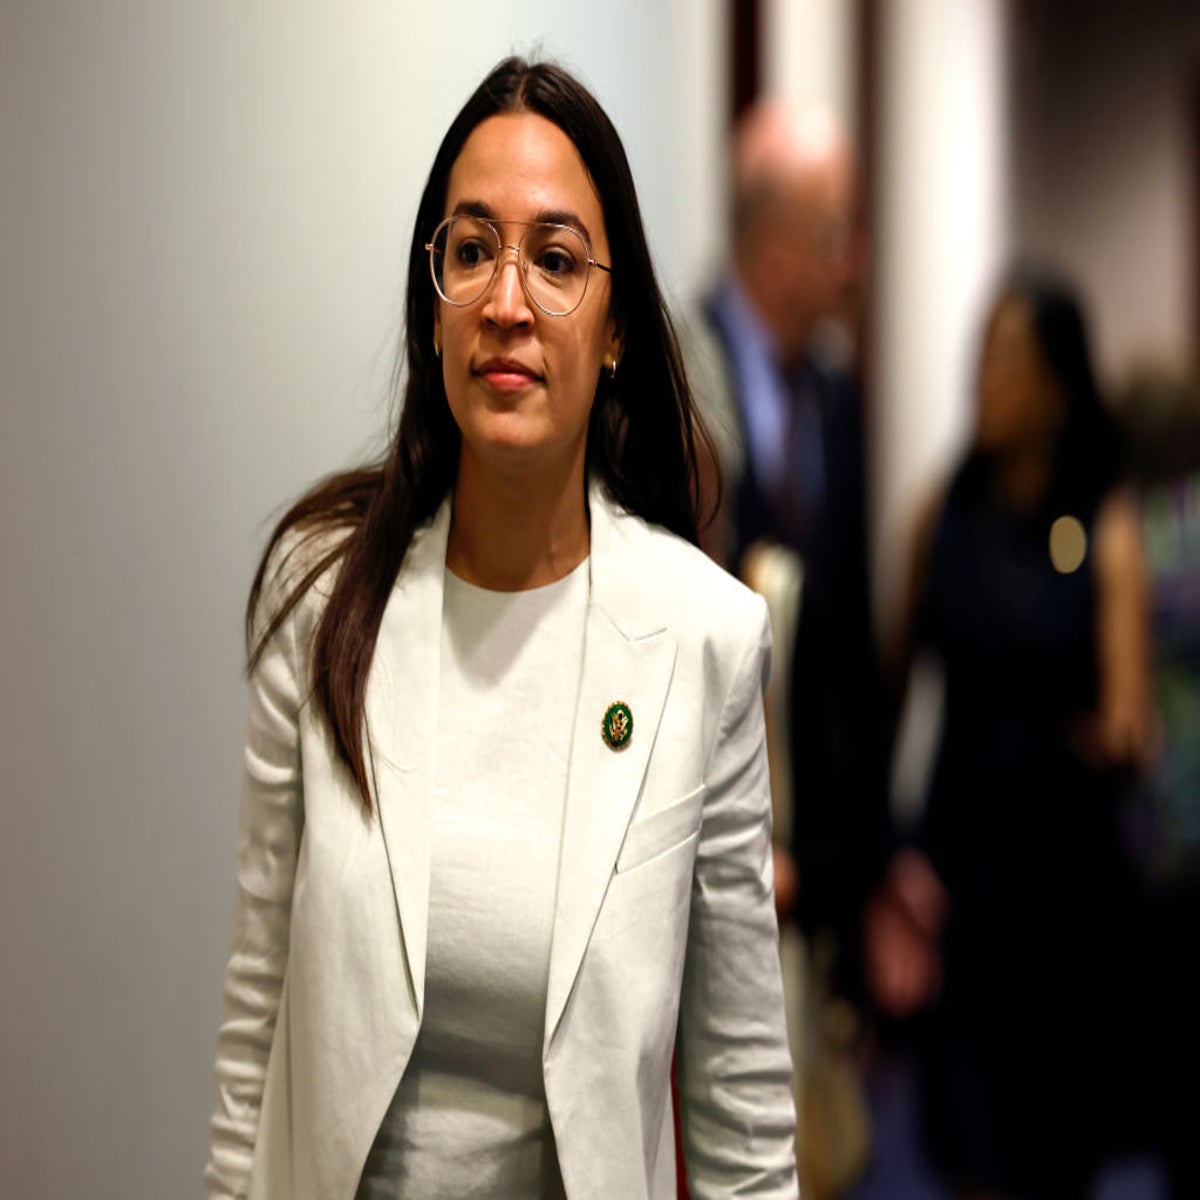 AOC asked if she would vote to oust McCarthy. Hear her response